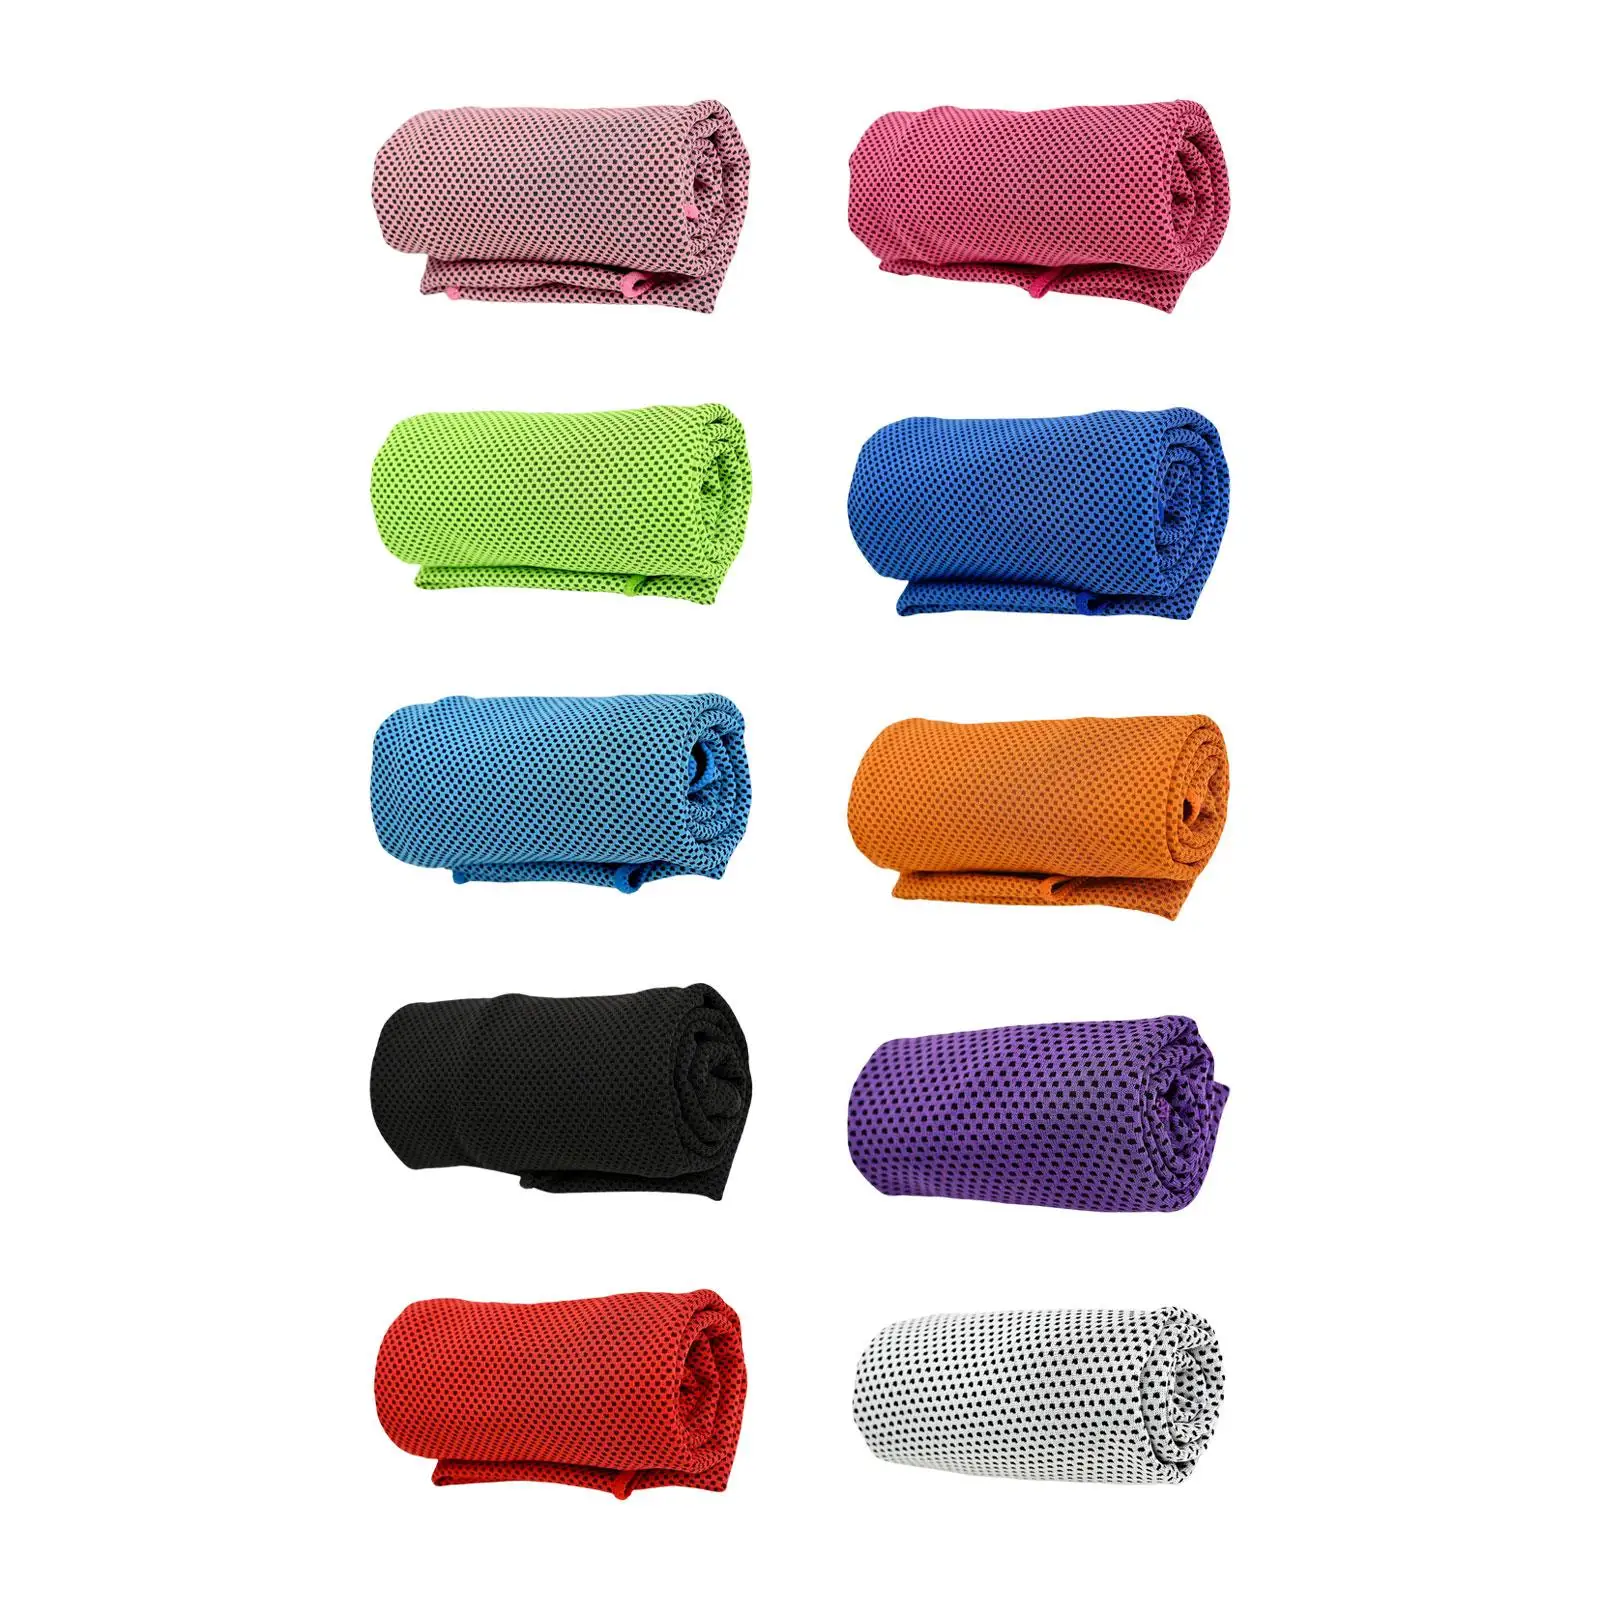 Breathable Chilly Towel Neck Wrap Cool Towel for Camping Jogging Pilates